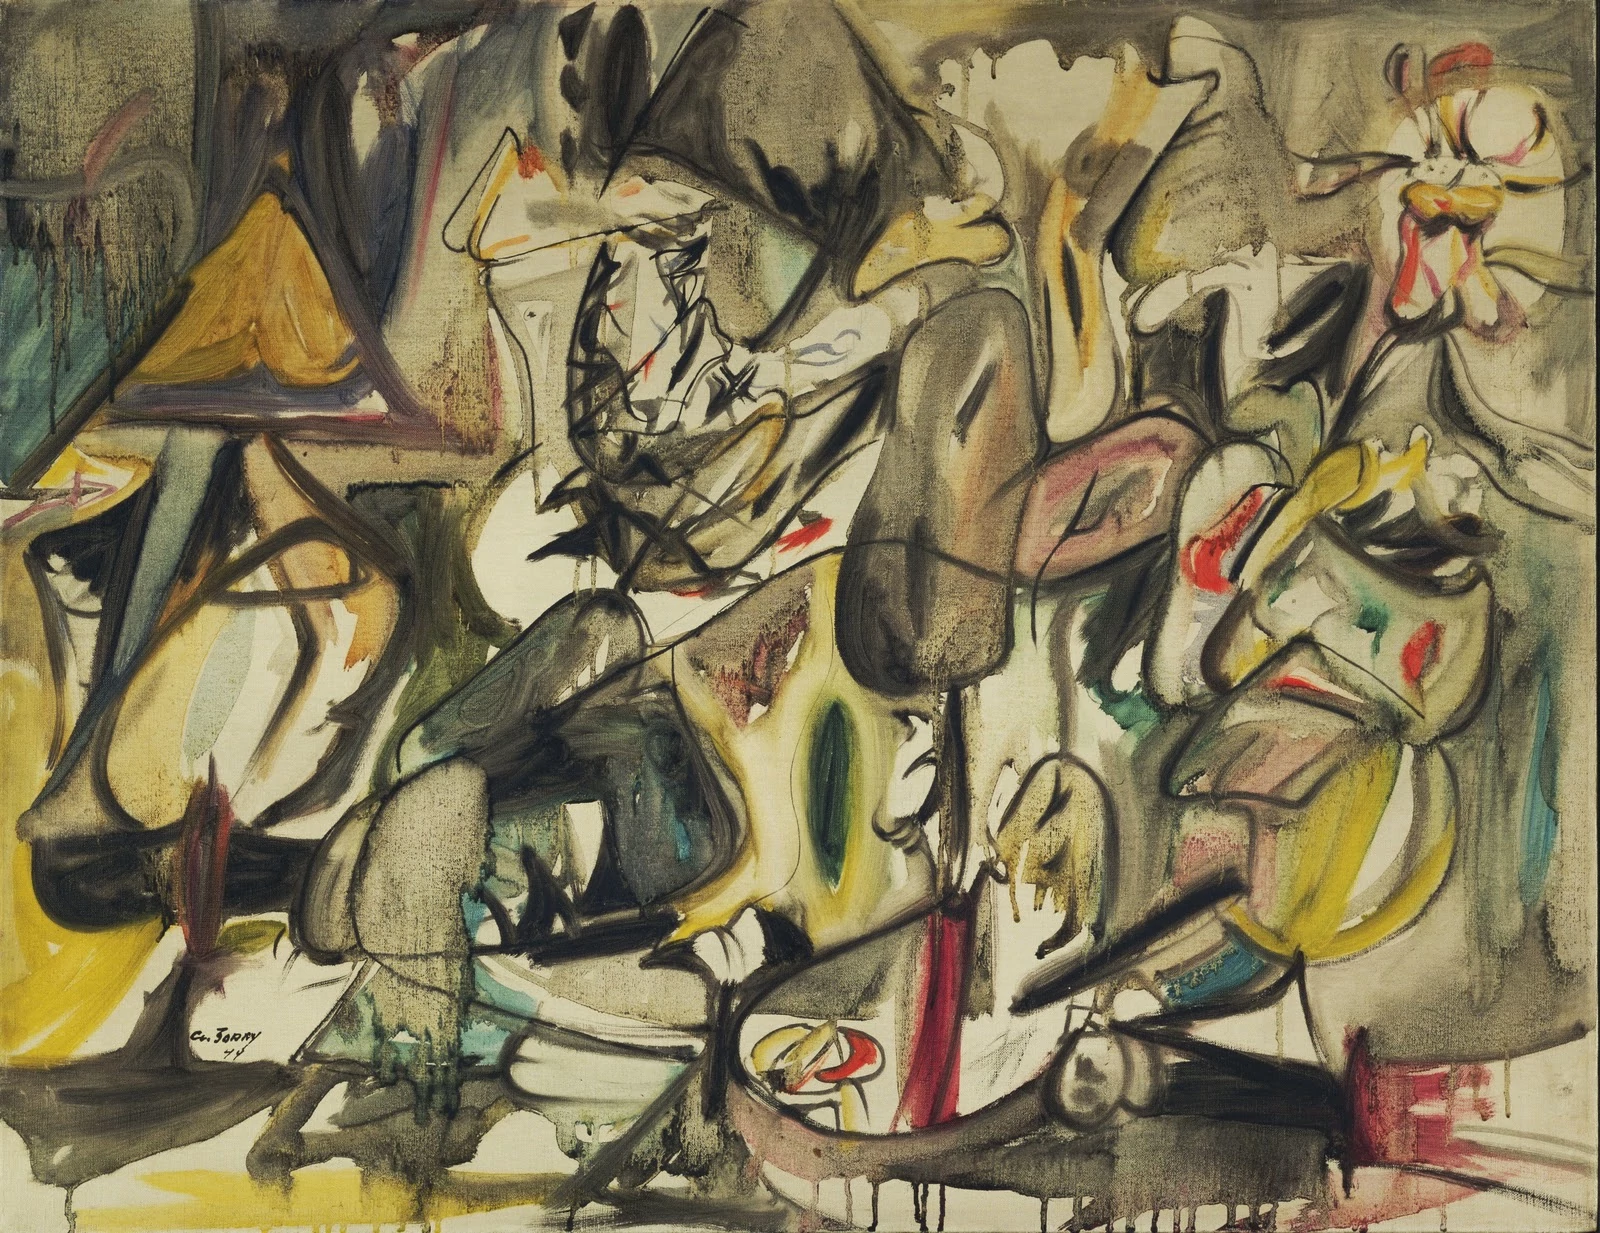 The Leaf of the Artichoke is an Owl, Arshile Gorky